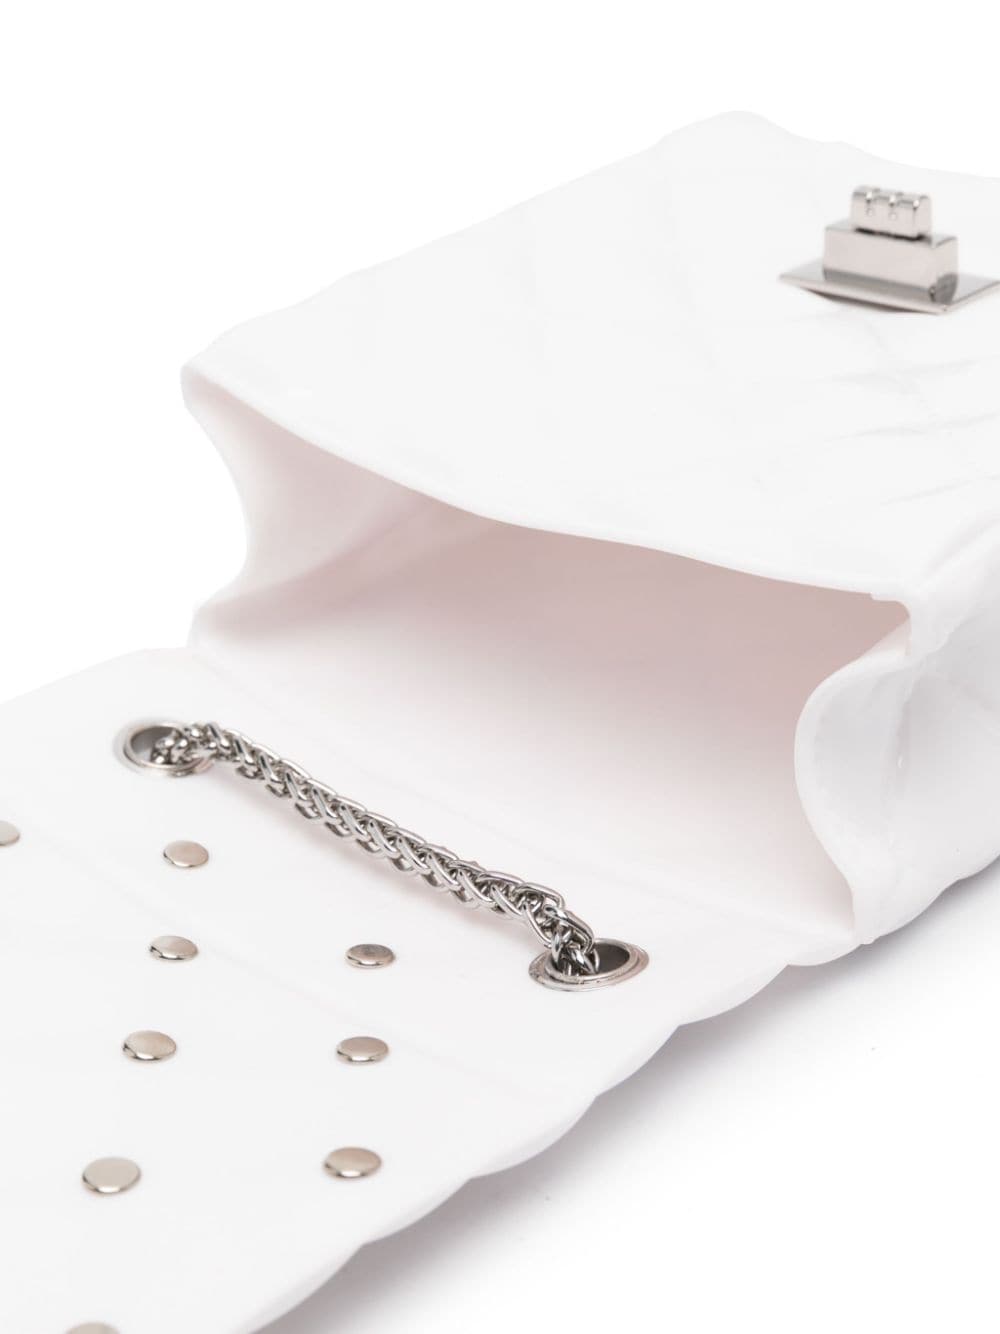 White quilted design bag with rhinestones